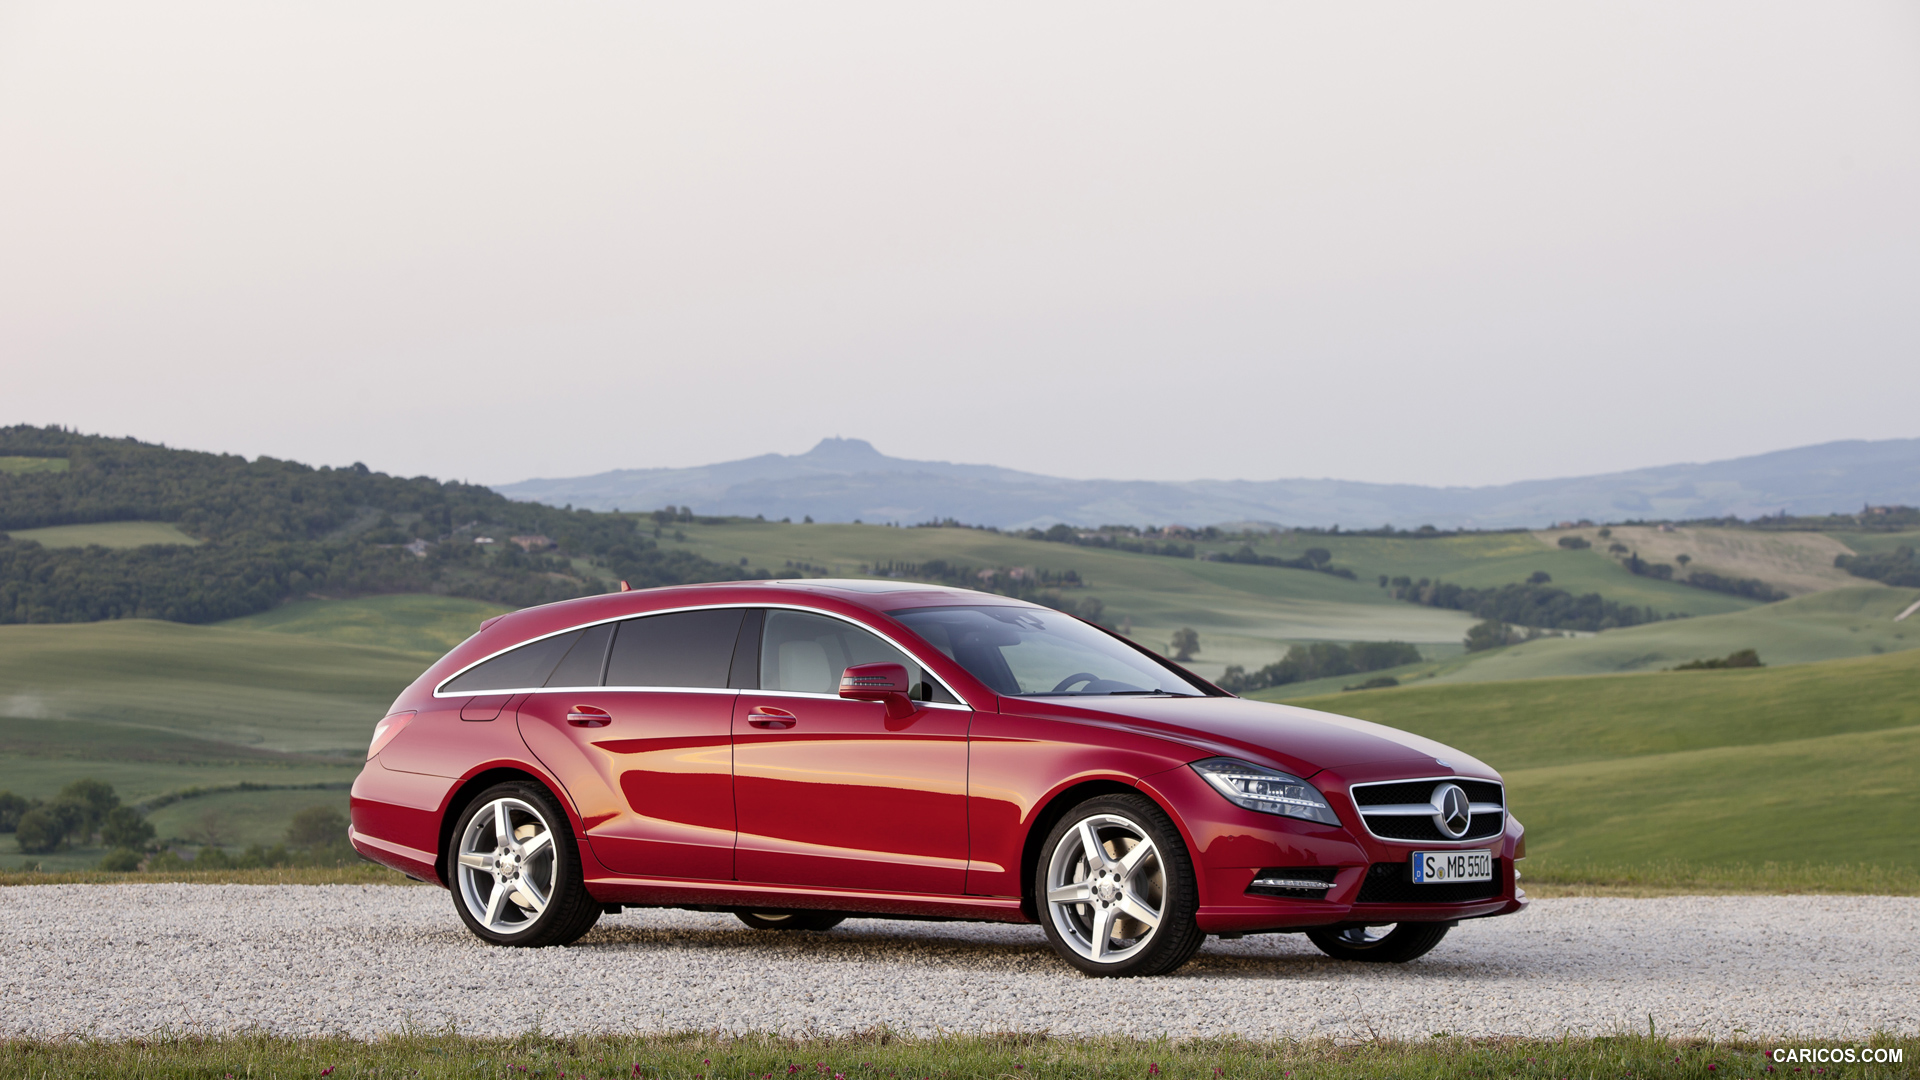 2013 Mercedes-Benz CLS 500 4MATIC Shooting Brake - Front, #2 of 184